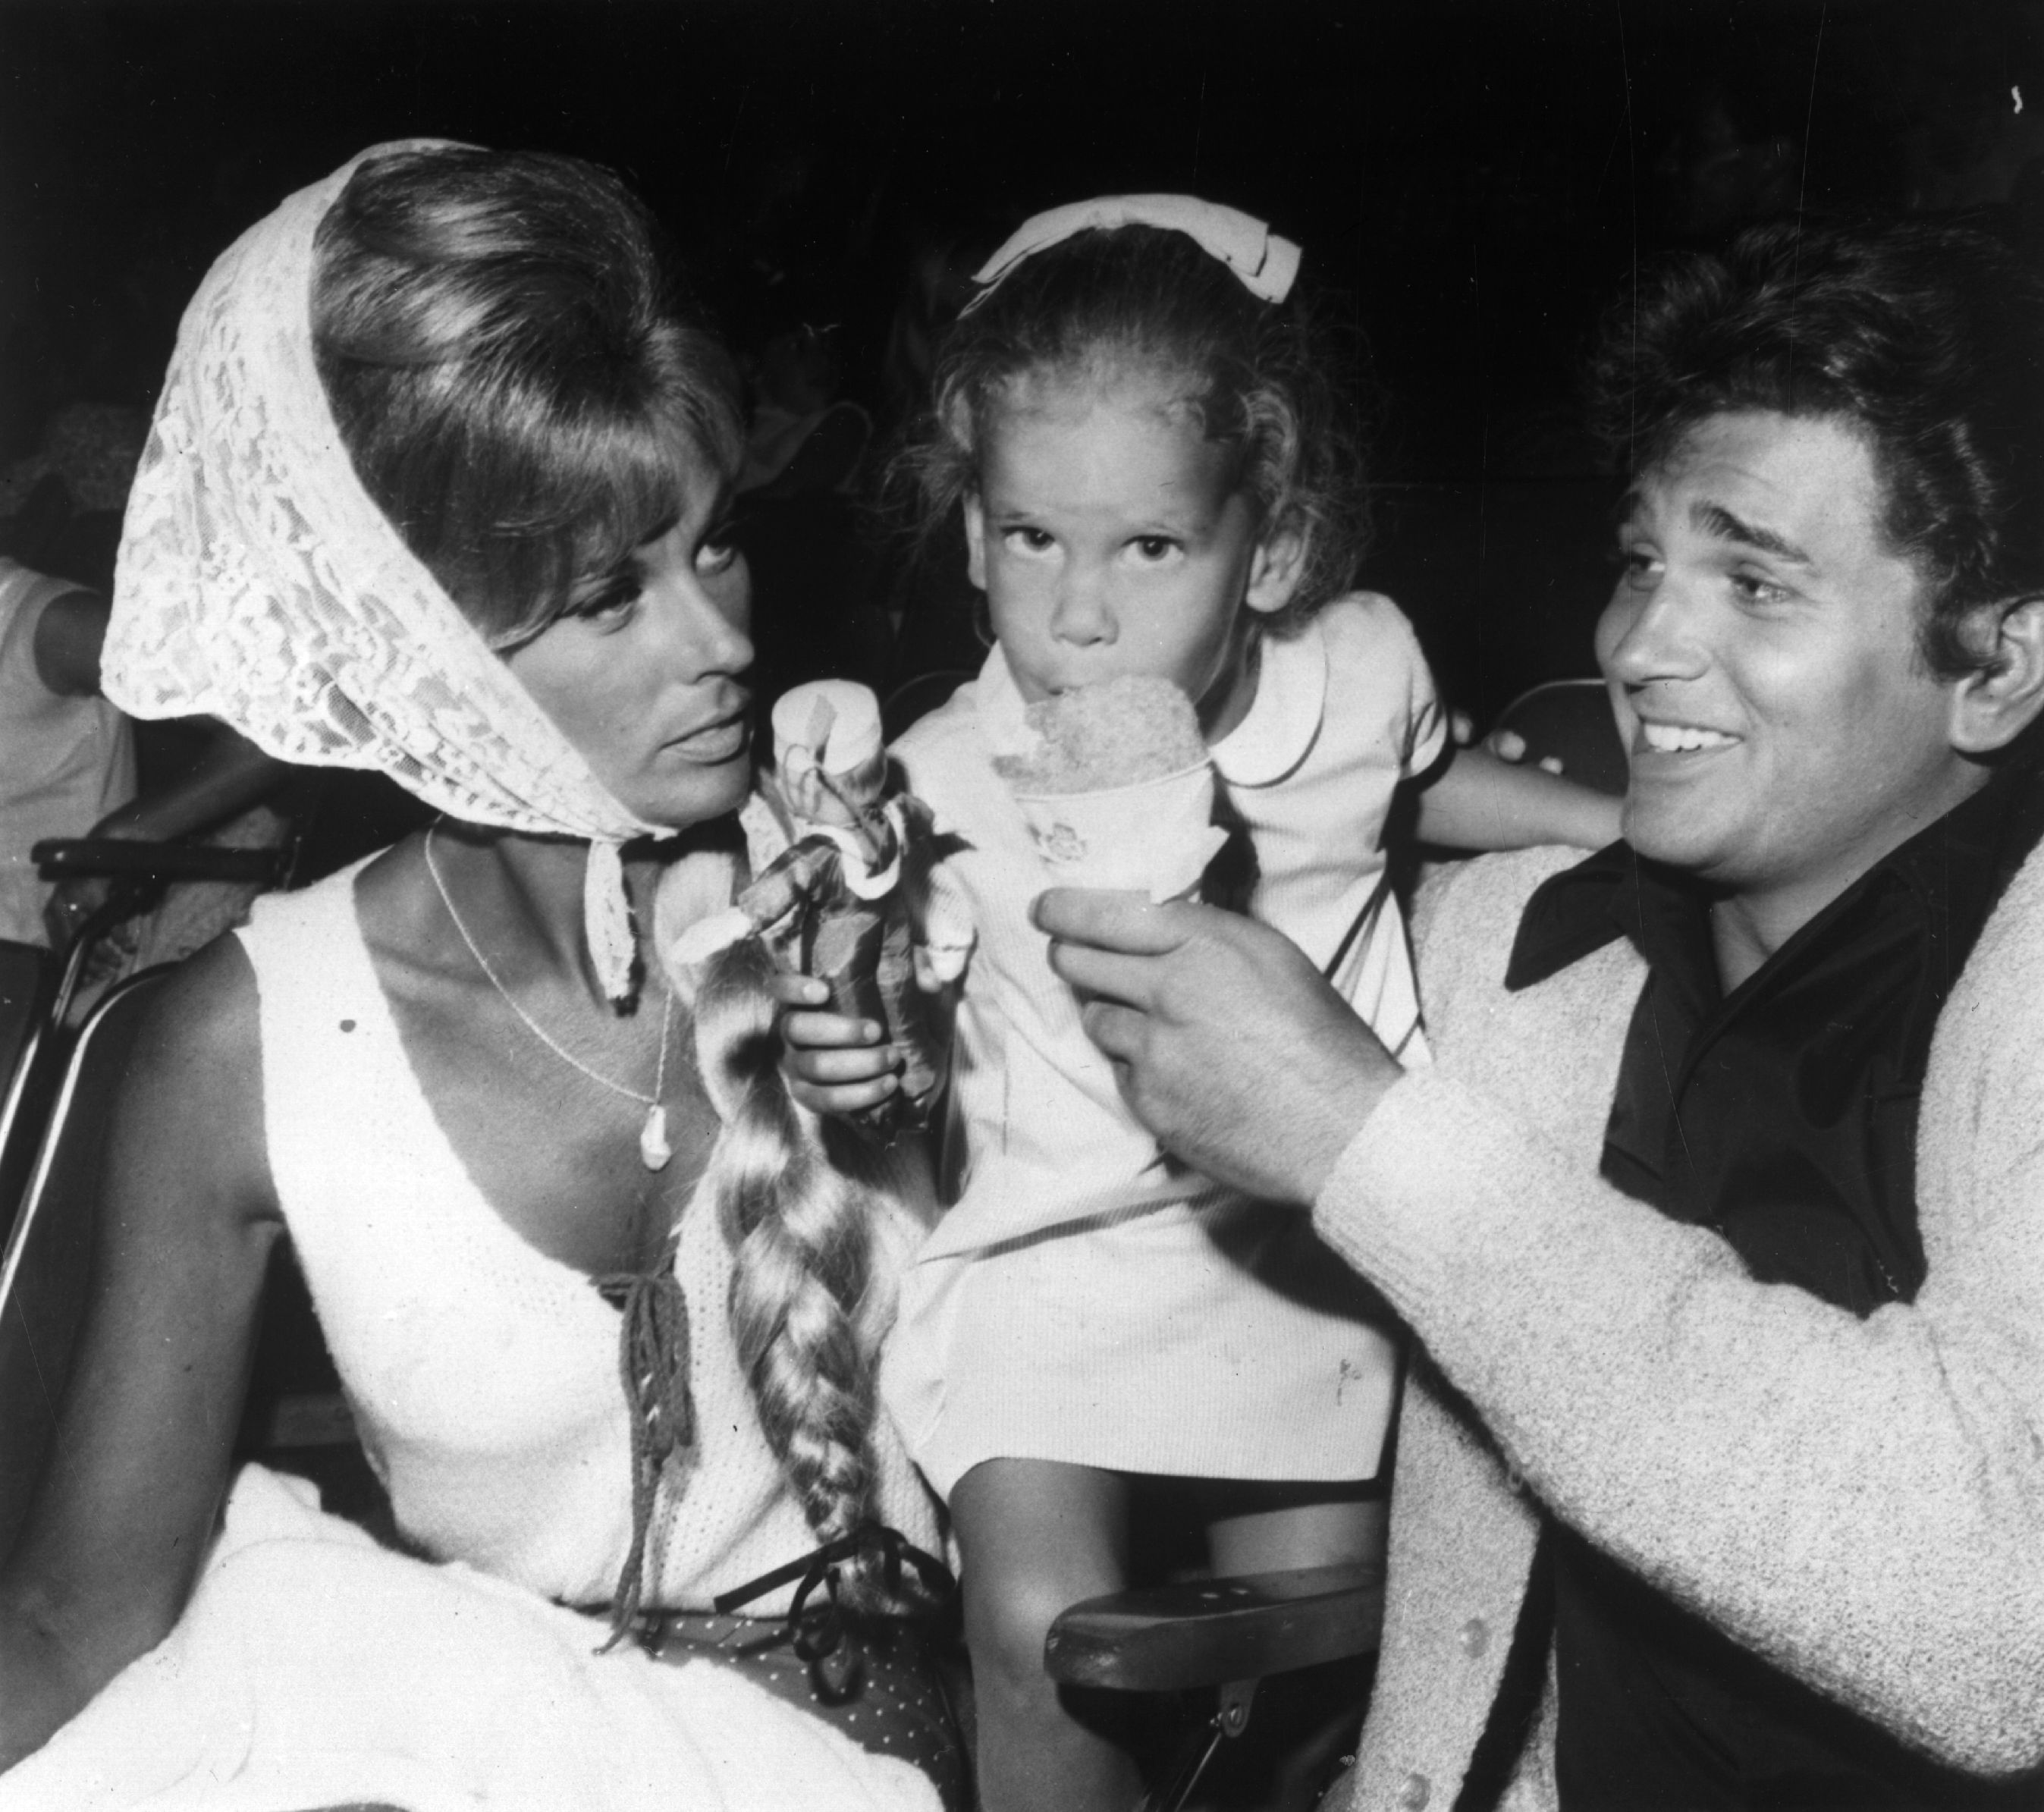 Michael Landonwith his wife Lynn and their daughter Lesley, who is Rachel Matthew's mother in 1965 | Source: Getty Images